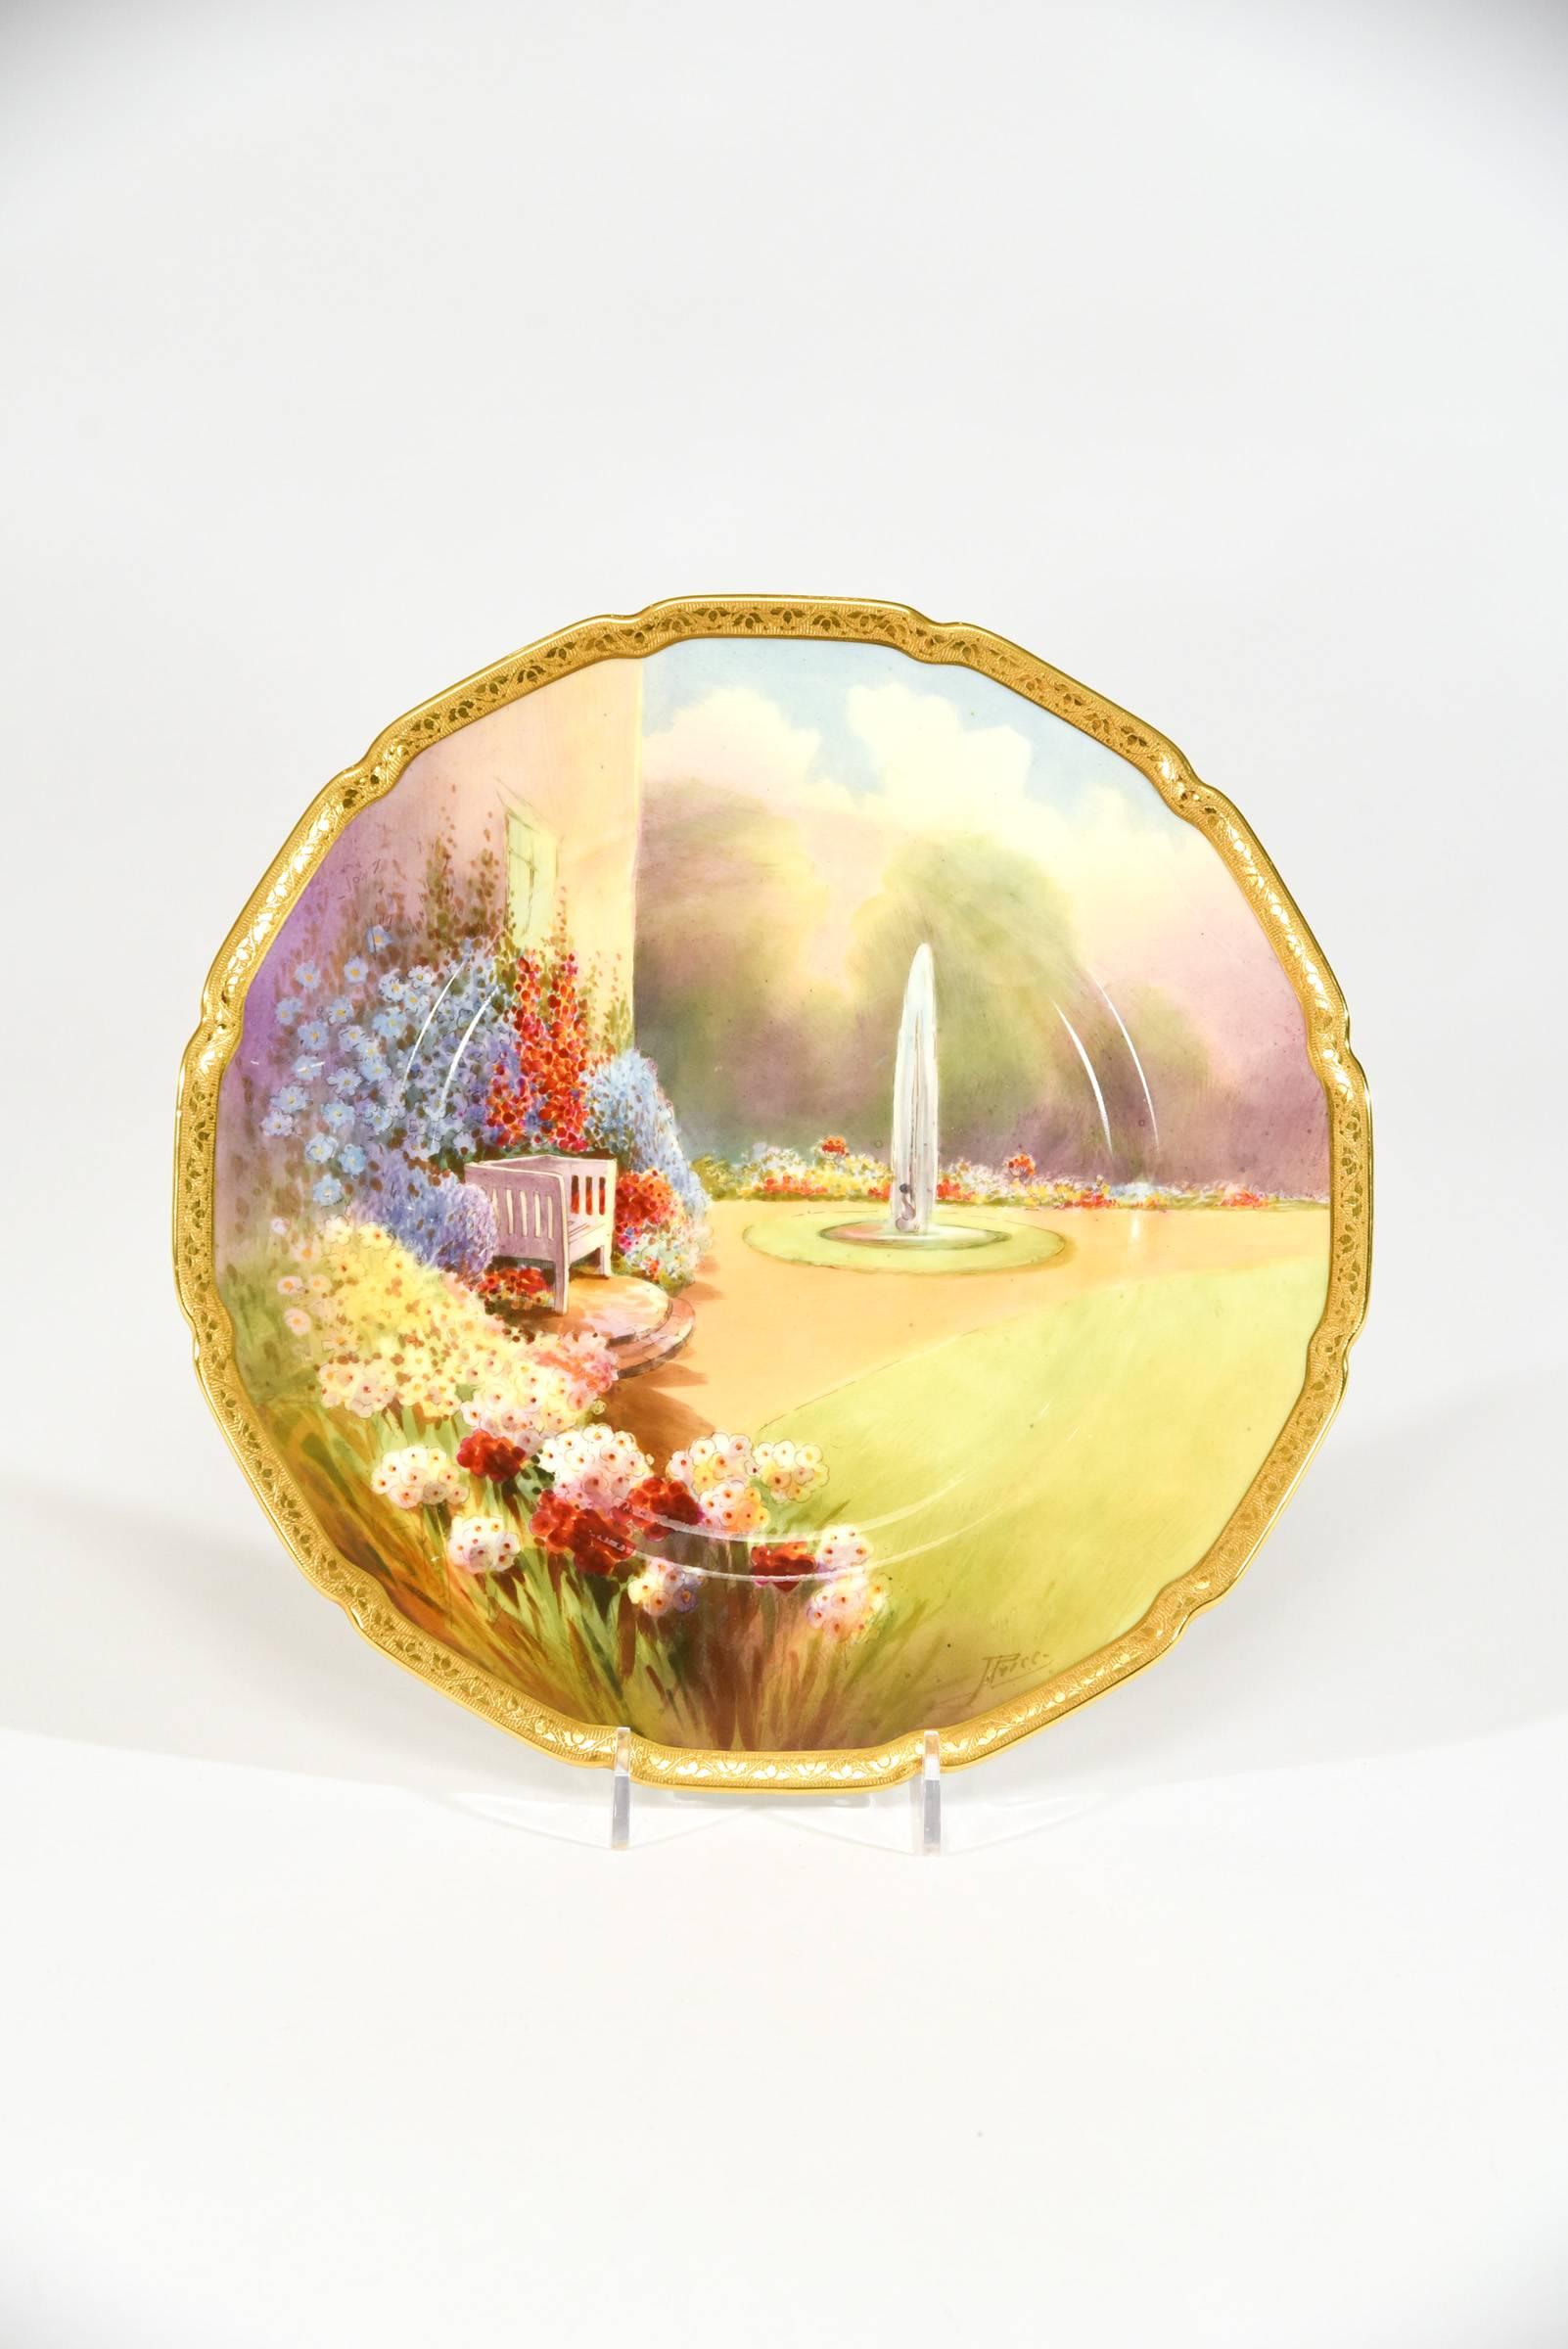 Set of 12 Royal Doulton Scenic Hand-Painted Artist Signed Garden Plates W/ Gold In Excellent Condition For Sale In Great Barrington, MA